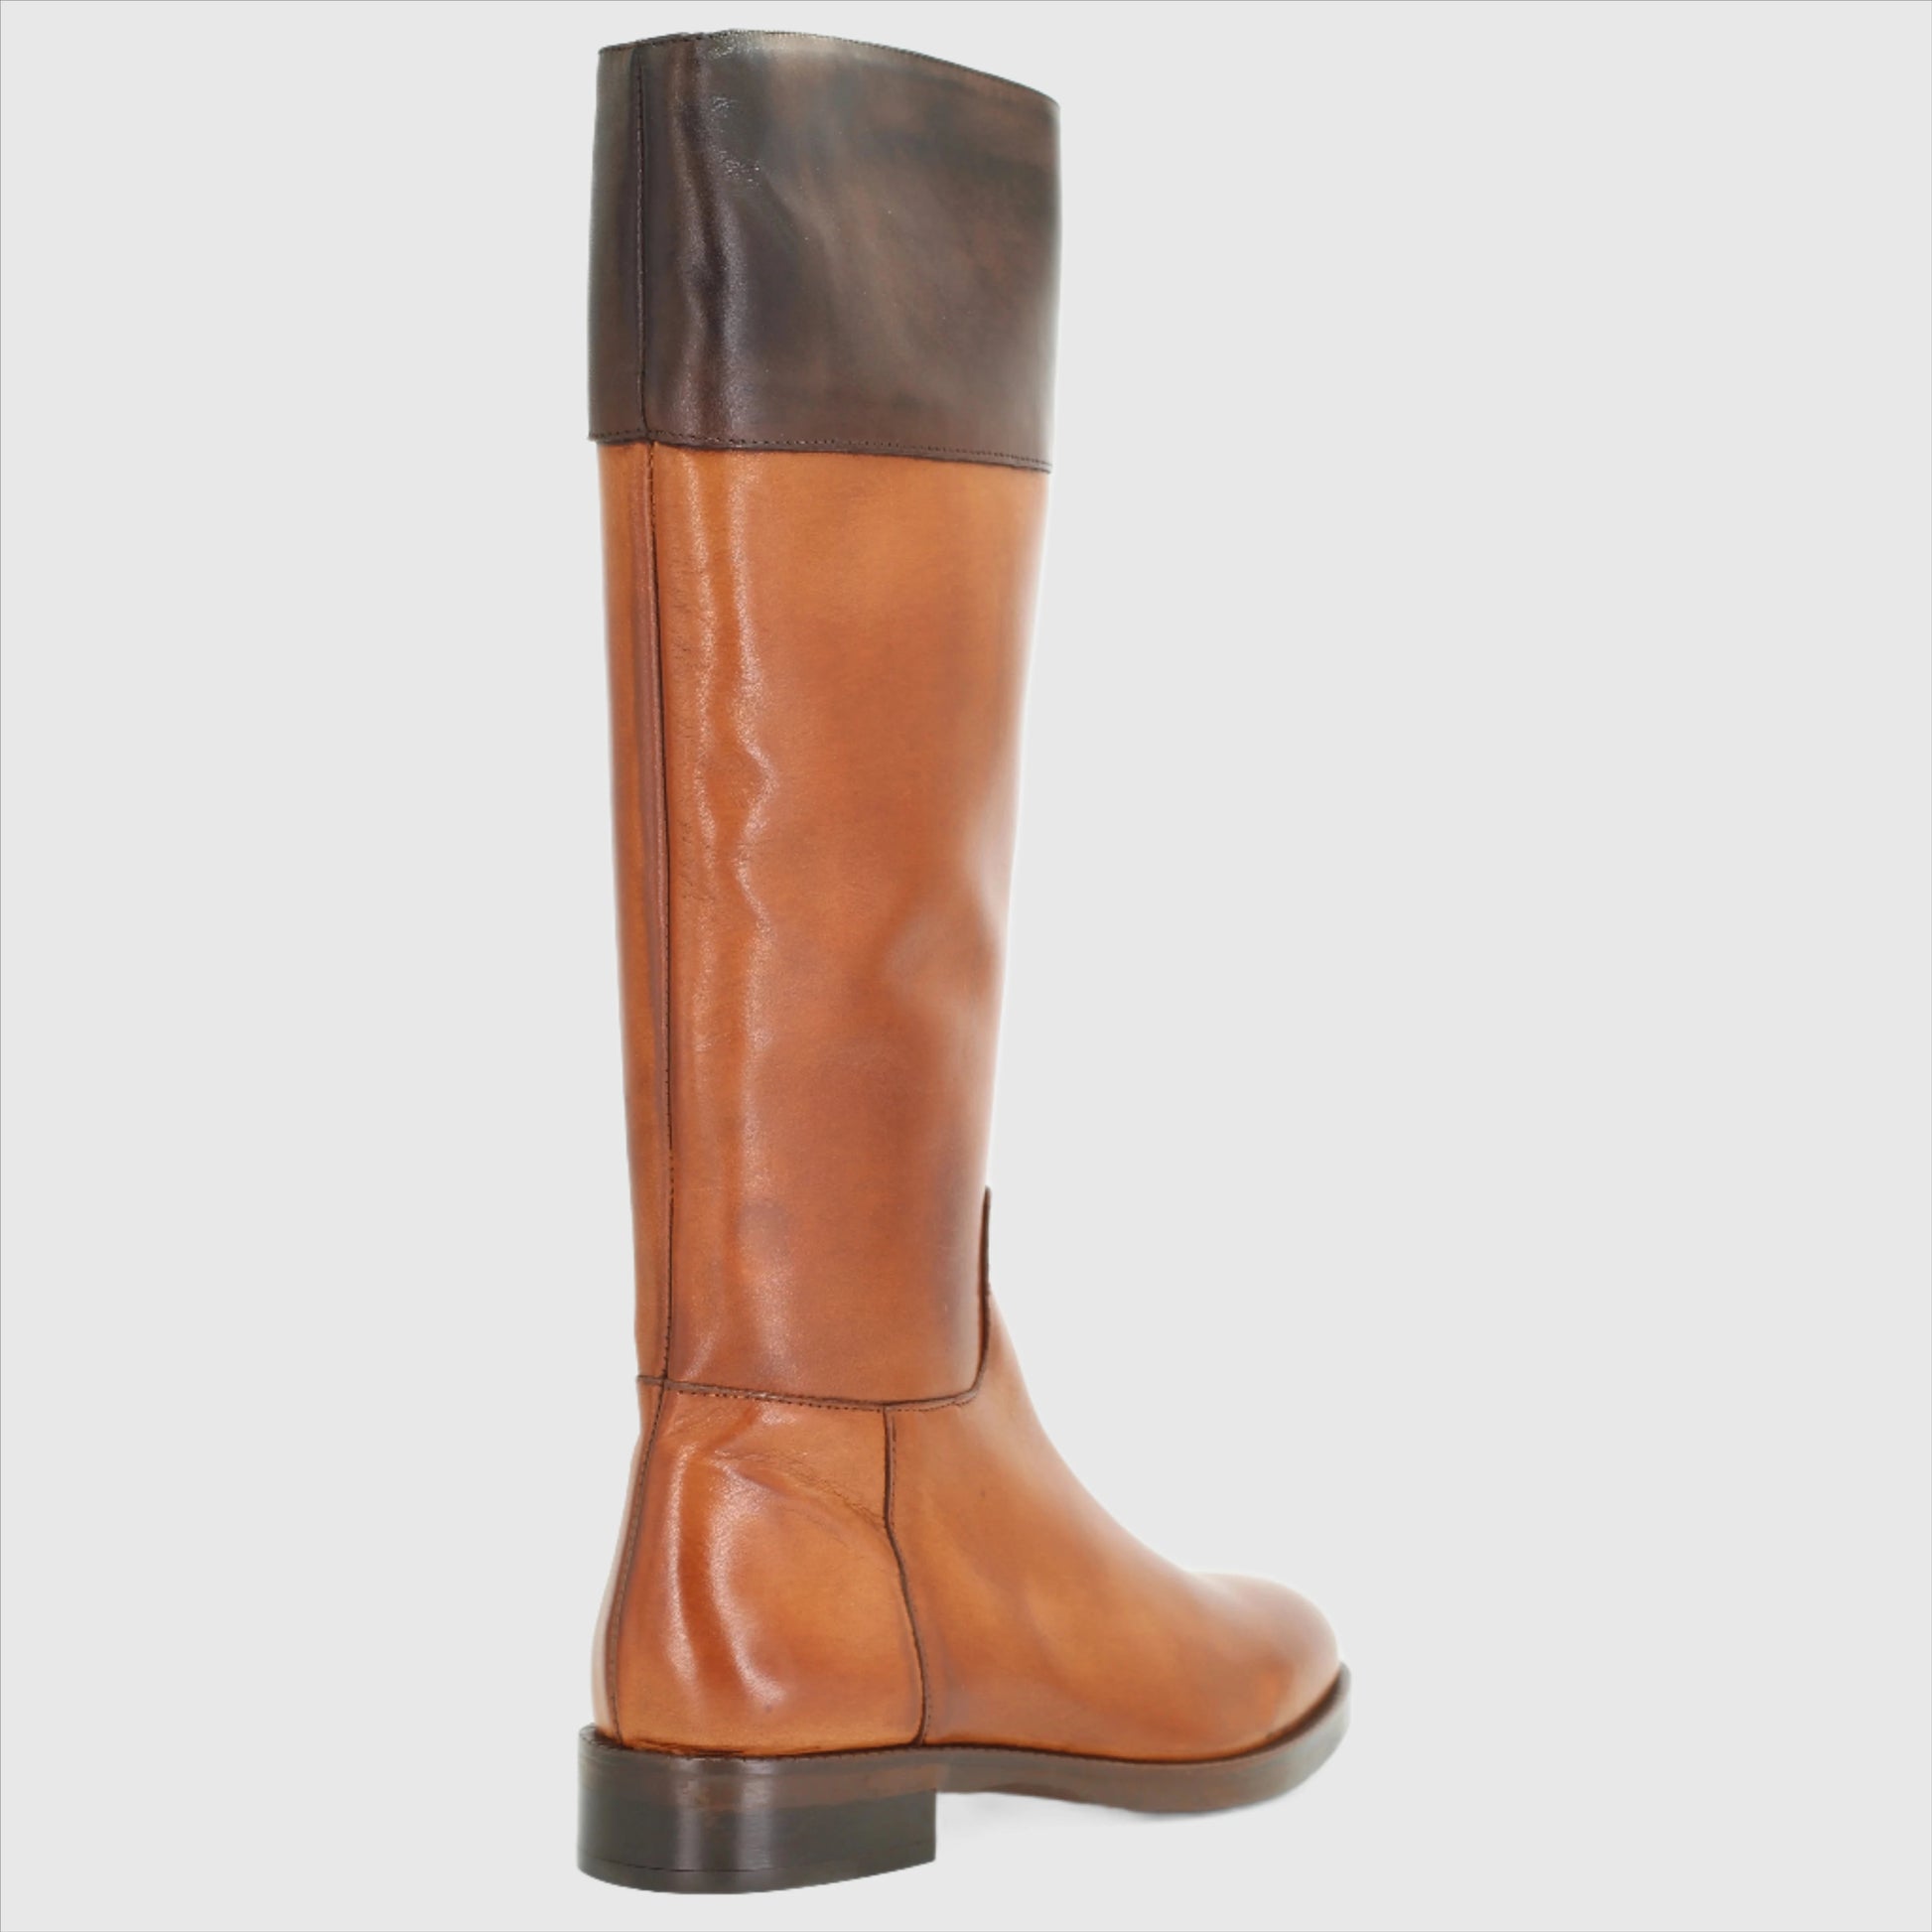 Shop Handmade Italian Leather equestrian boot in cuoio testa di moro (GC2060) or browse our range of hand-made Italian shoes in leather or suede in-store at Aliverti Cape Town, or shop online. We deliver in South Africa & offer multiple payment plans as well as accept multiple safe & secure payment methods.